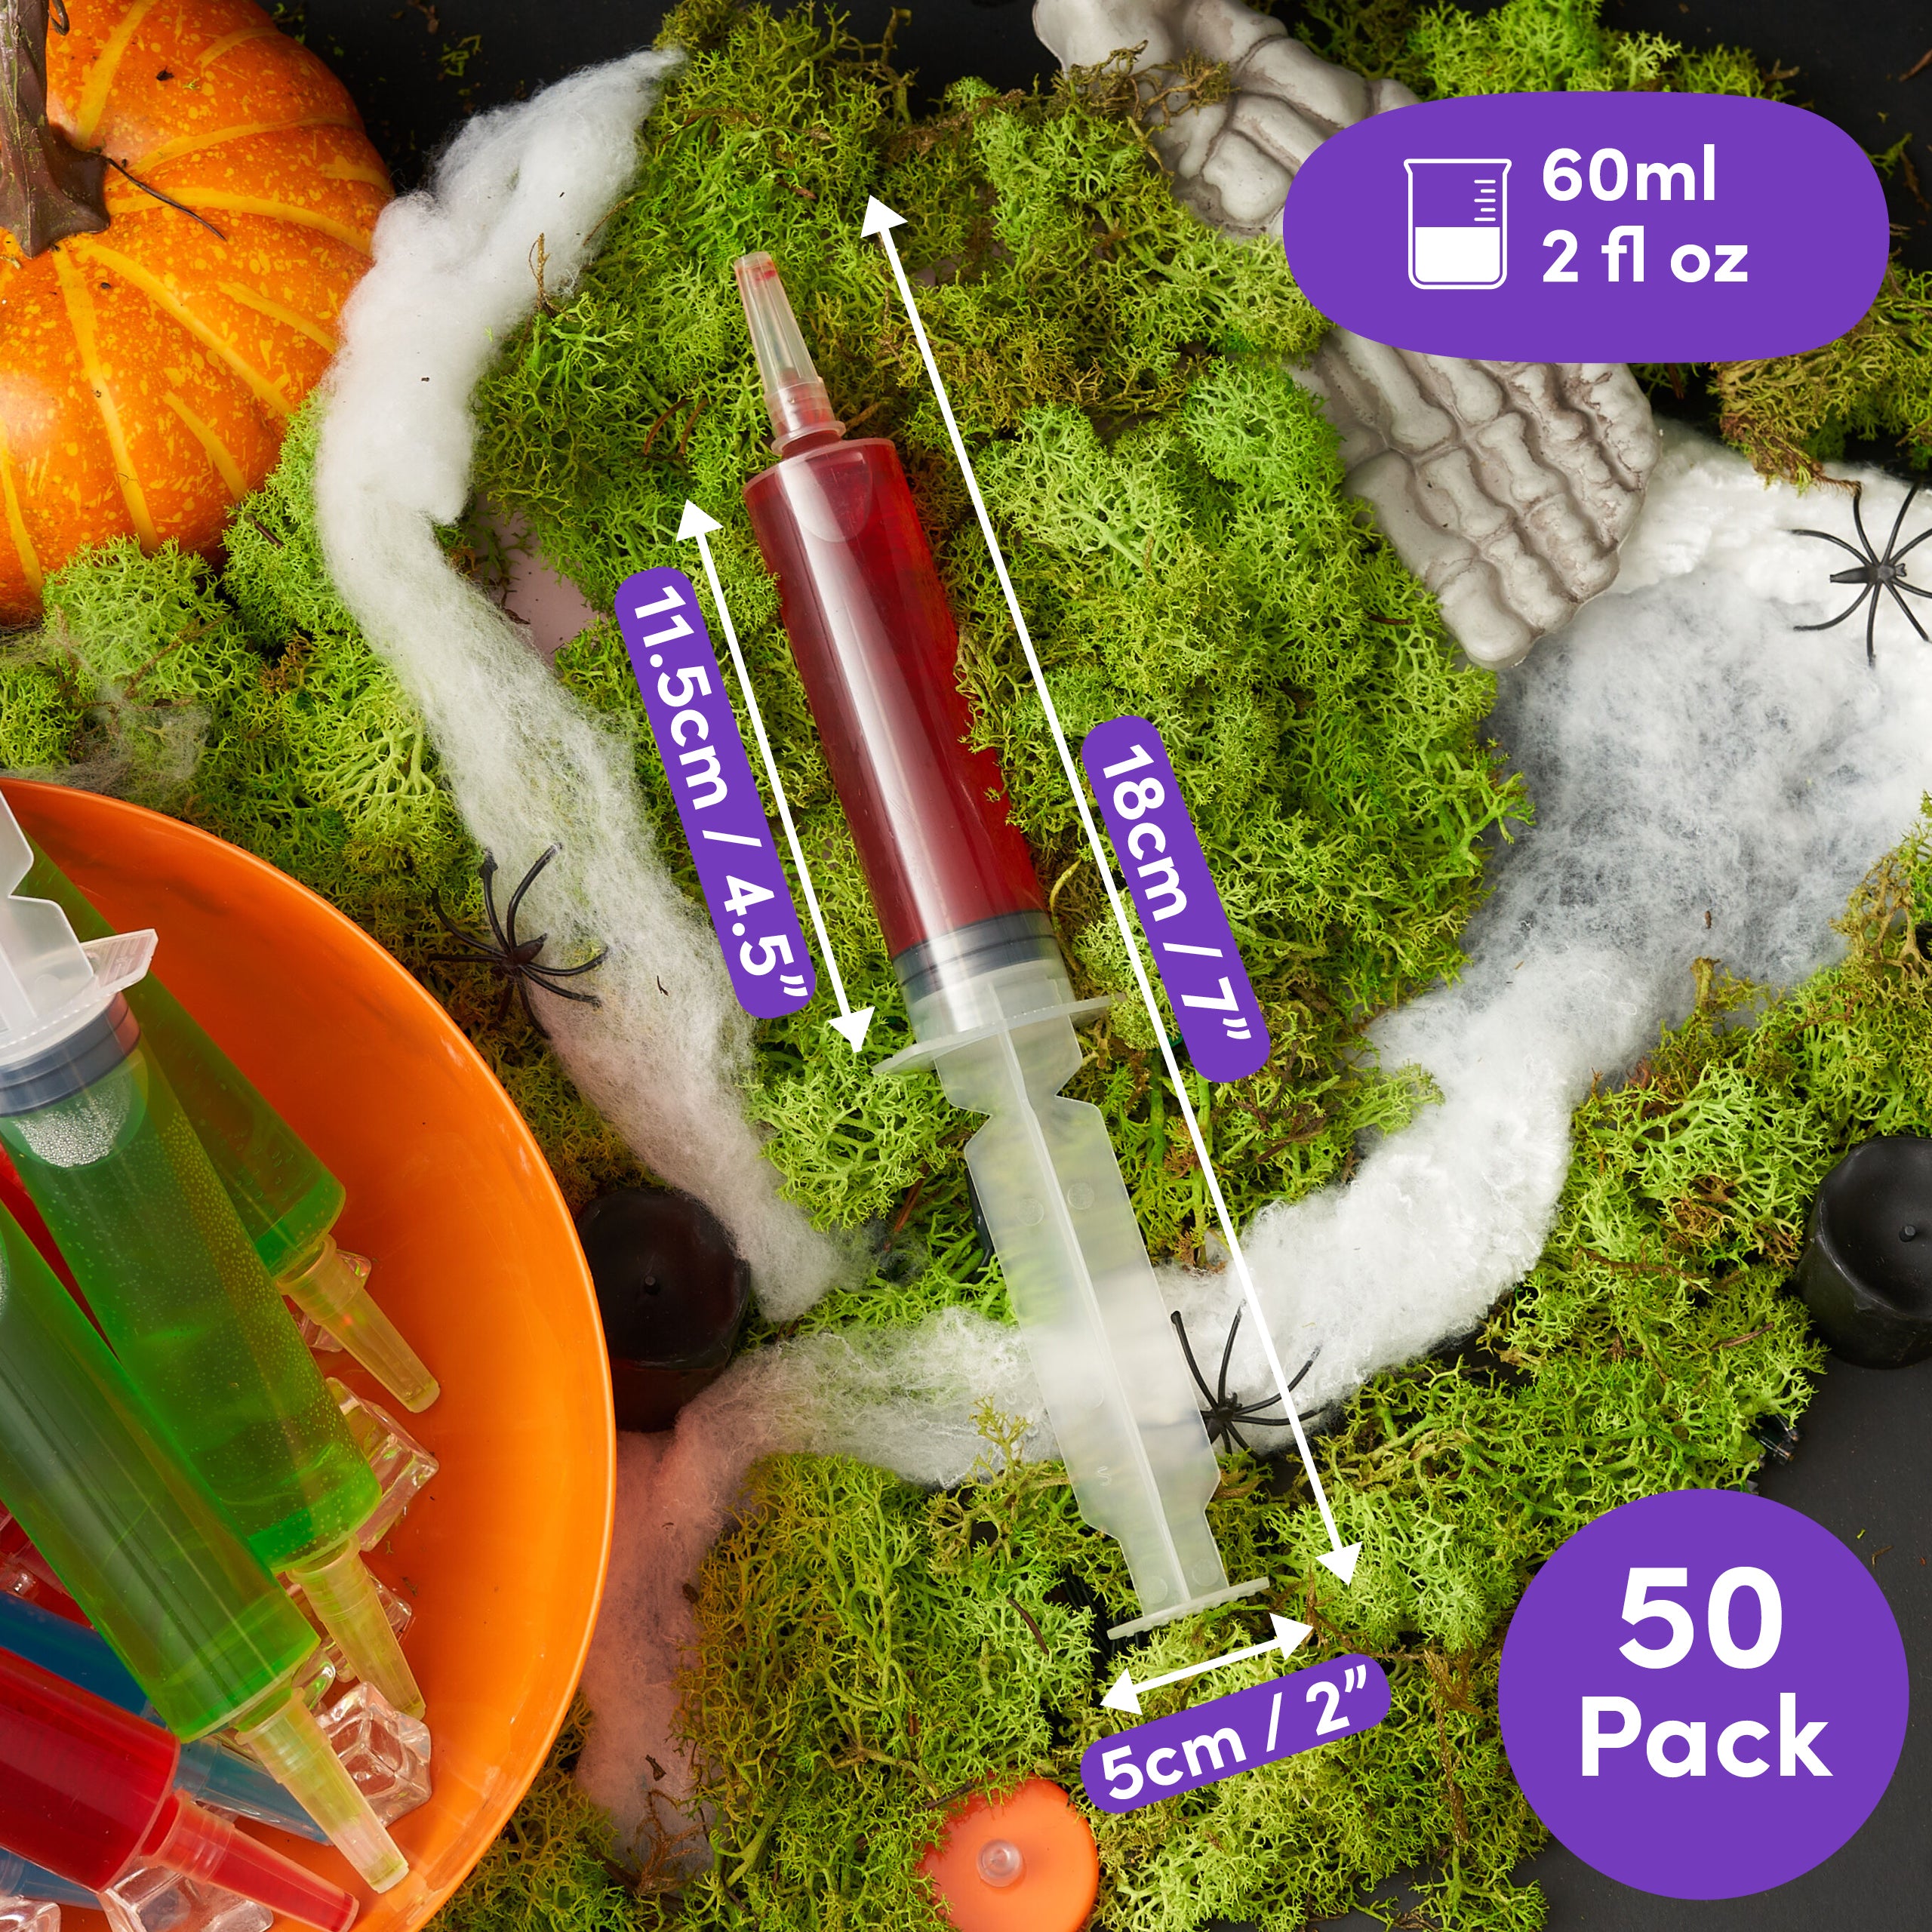 50 Reusable Double Jelly Shot Syringes